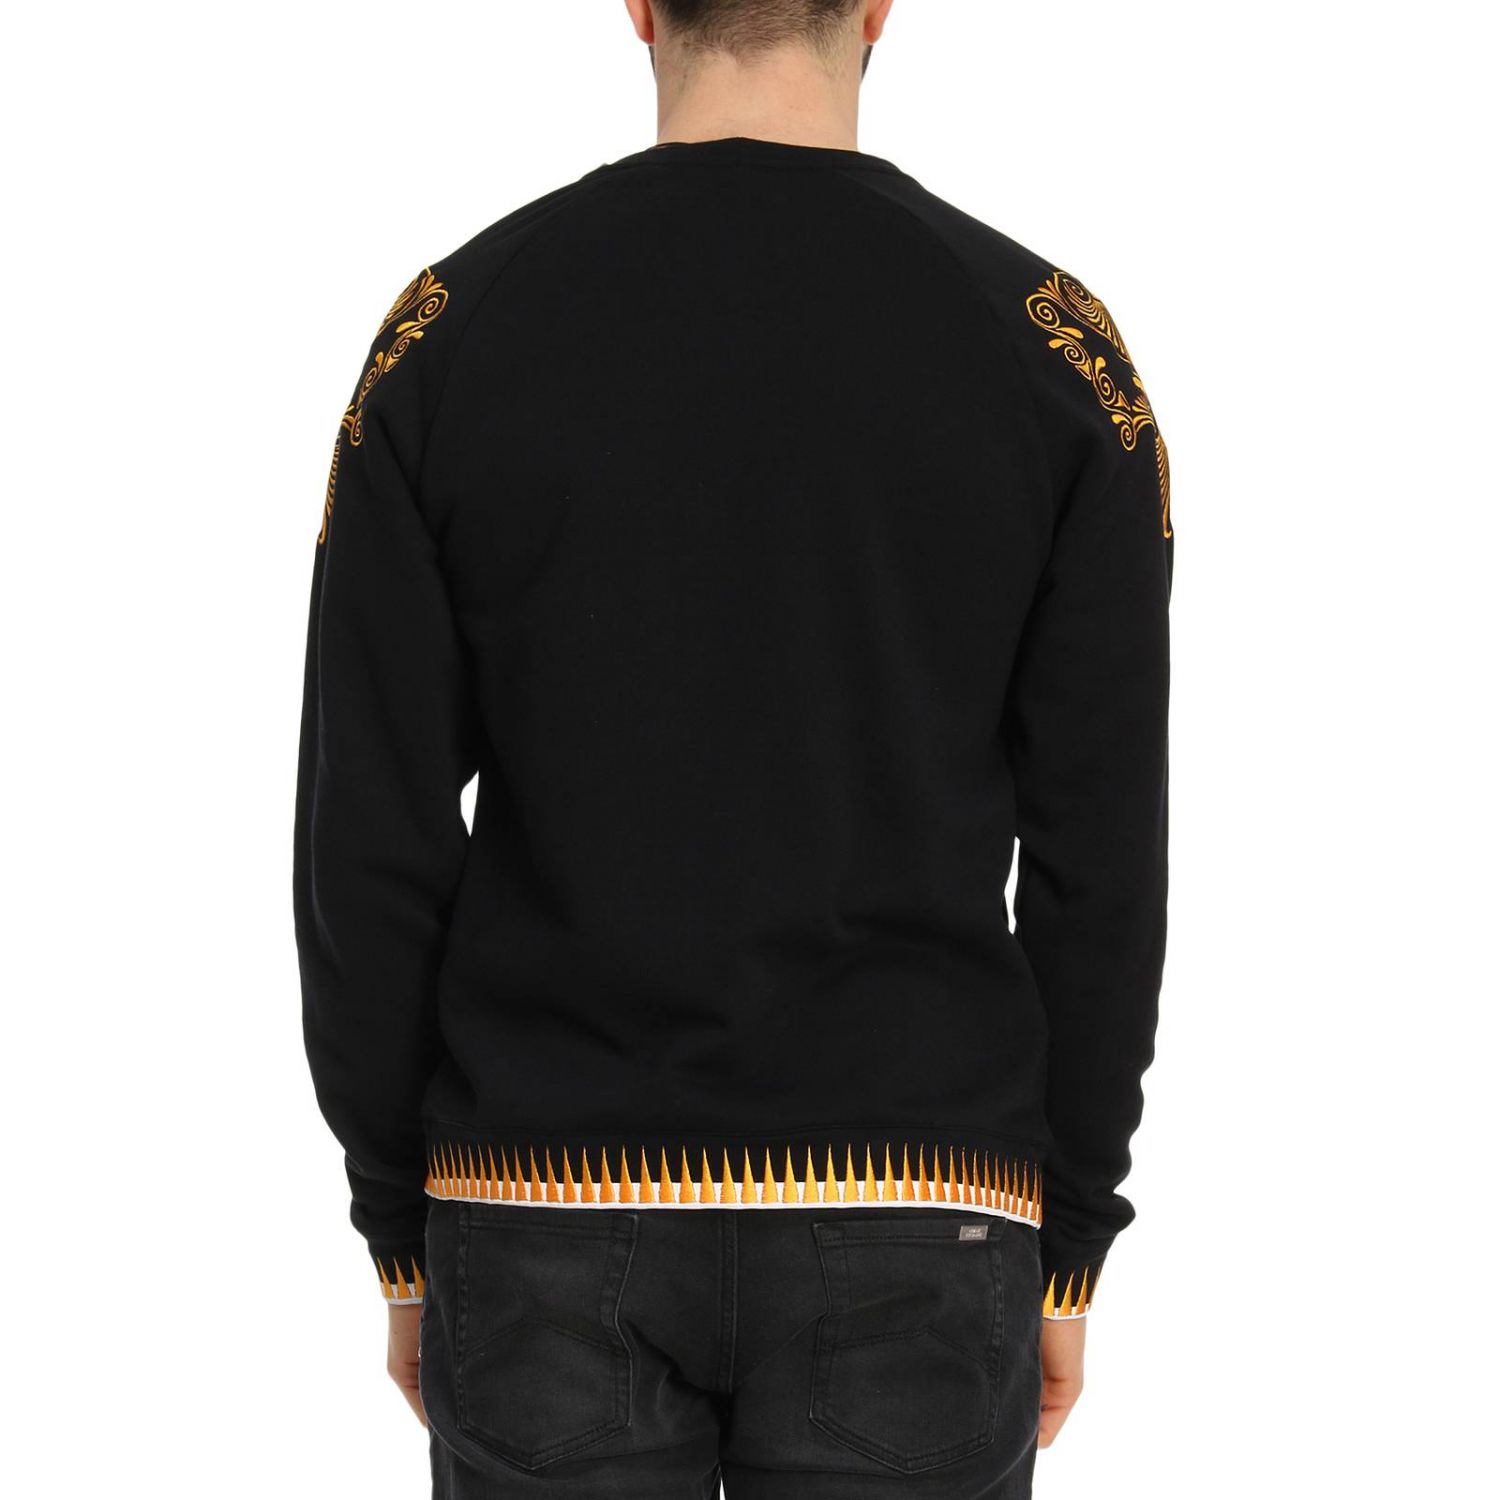 Versace Collection Outlet: Sweater men | Sweater Versace Collection Men ...